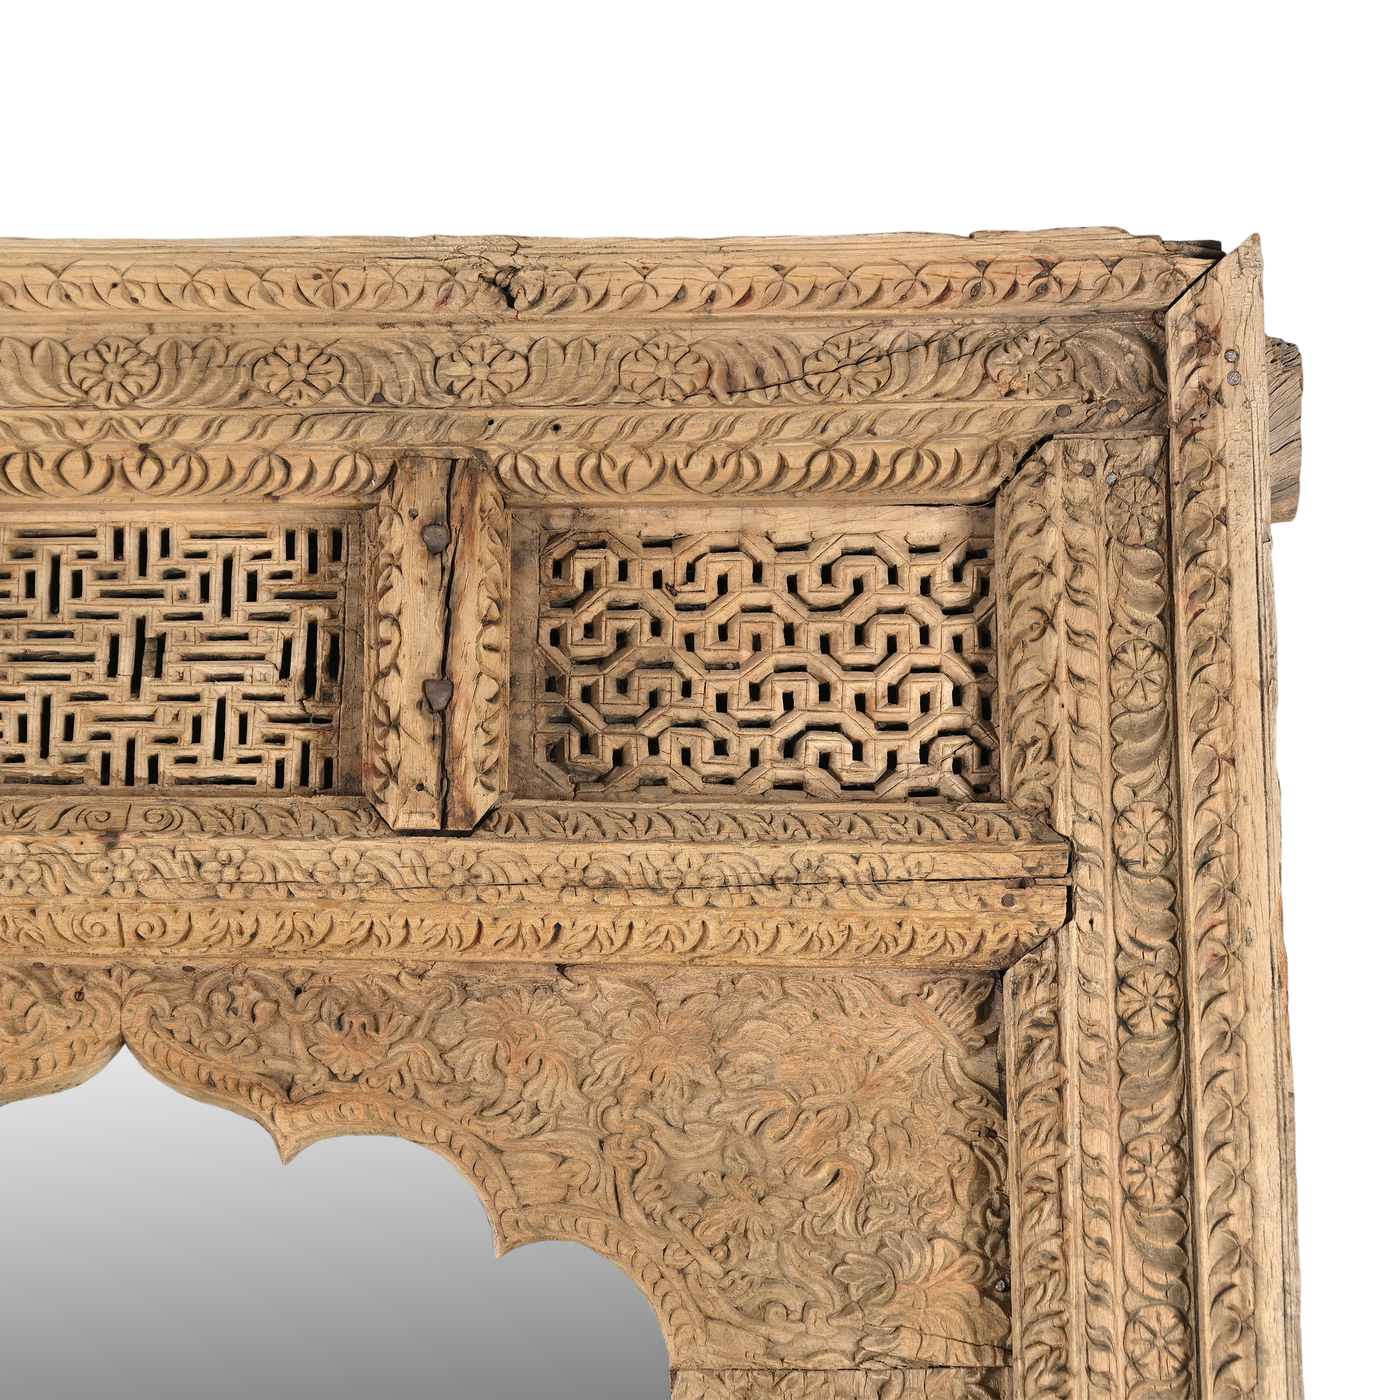 Nimbera - Carved wooden arch mirror n°3